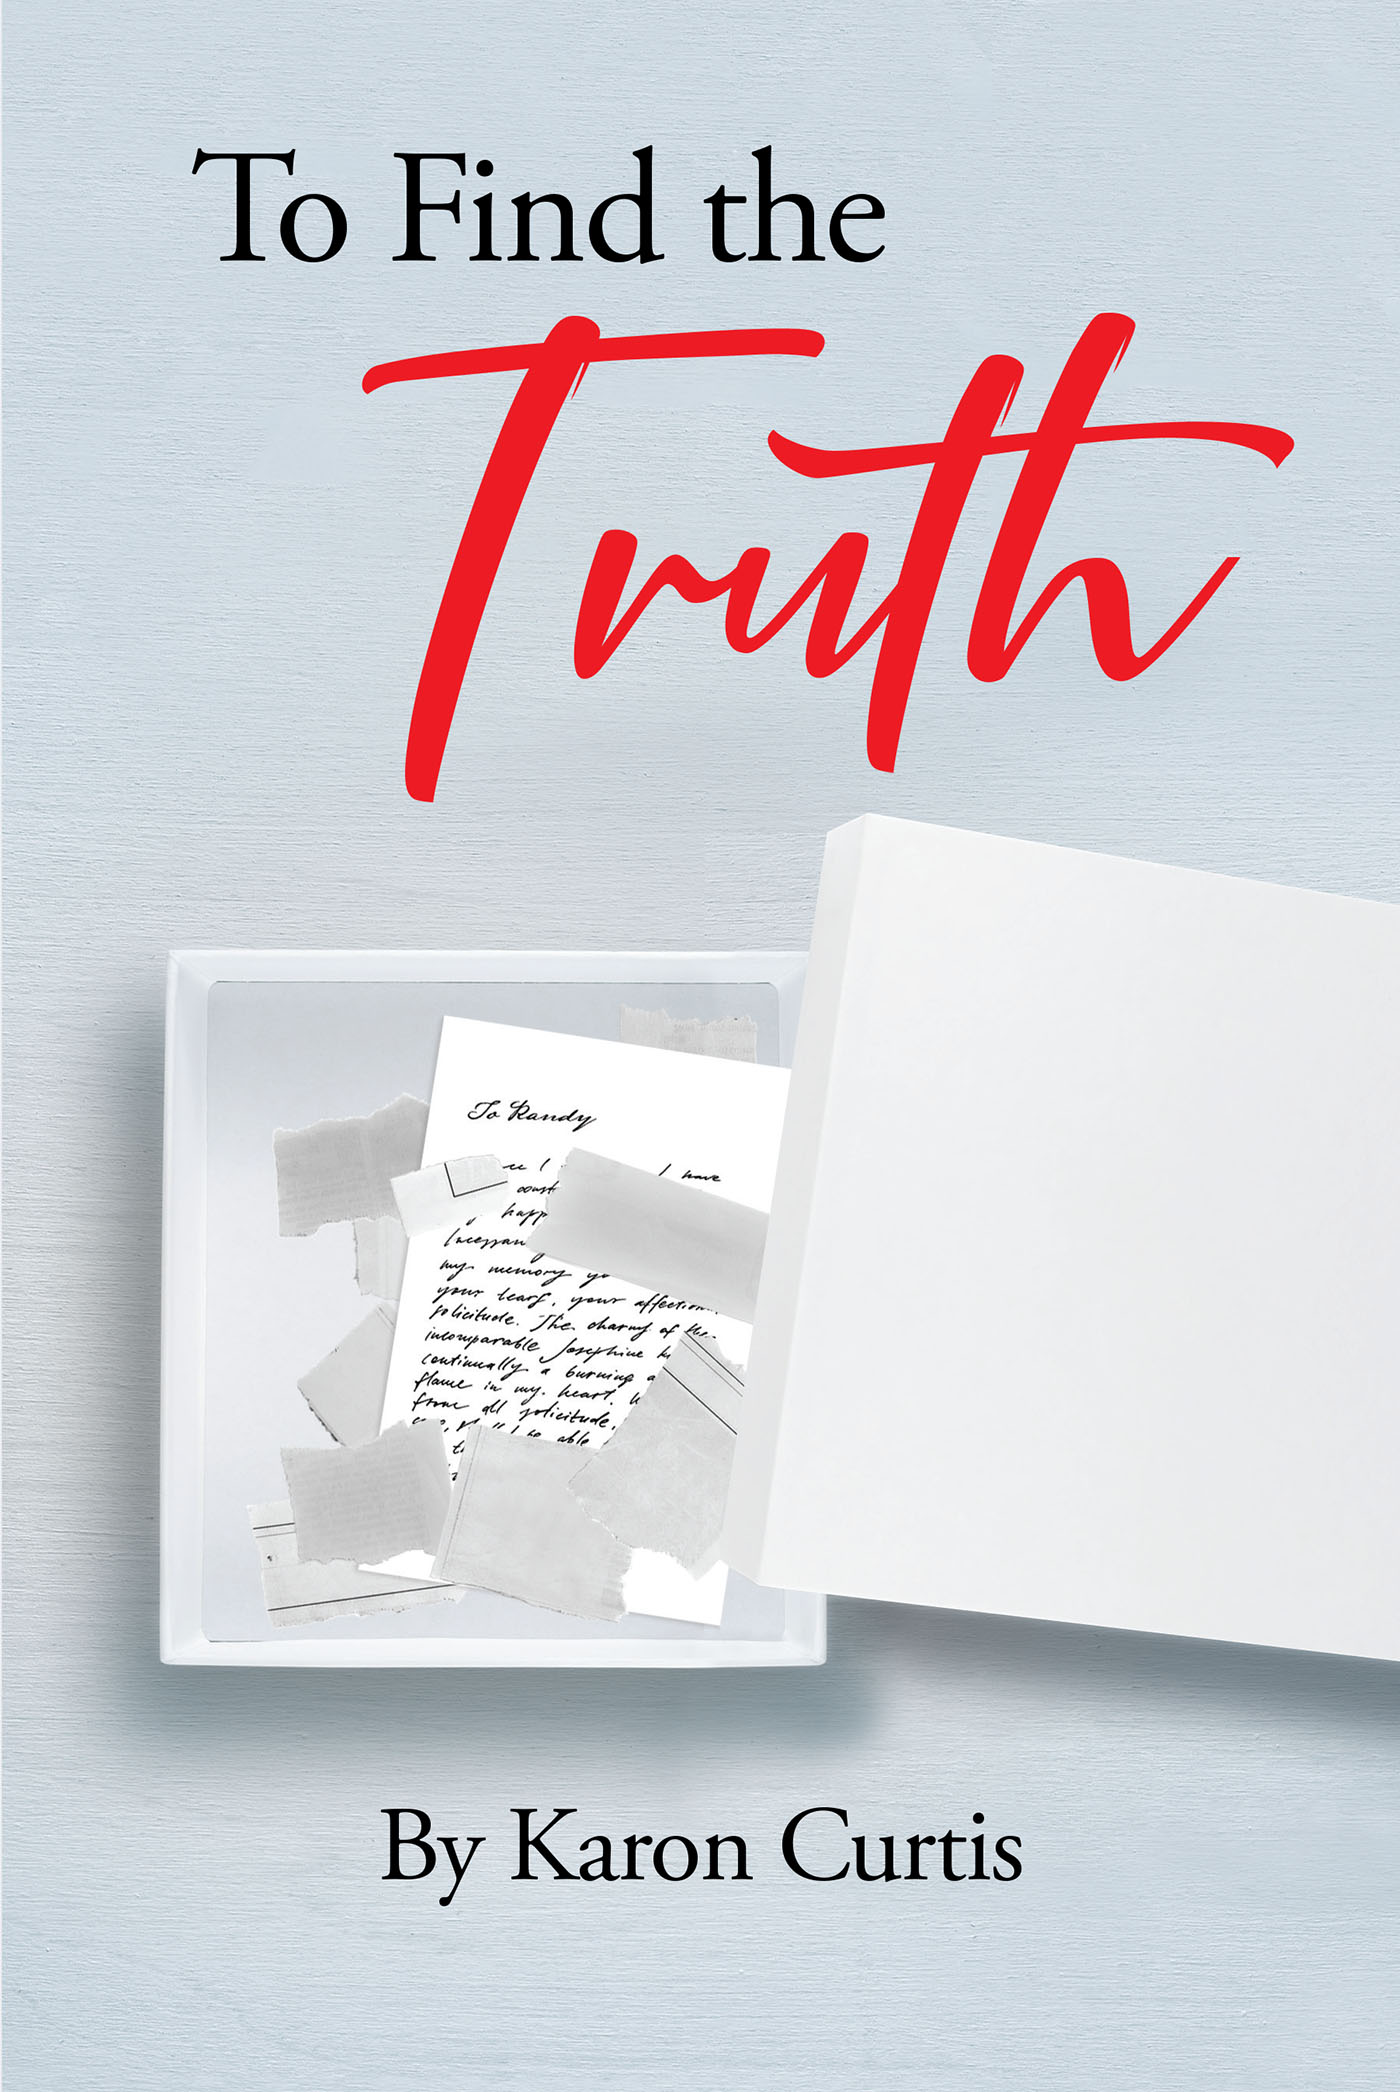 Author Karon Curtis’s New Book, "To Find the Truth," Centers Around a Young Man Who Wants Nothing More Than the Truth After an Accident Leaves Him with Numerous Questions